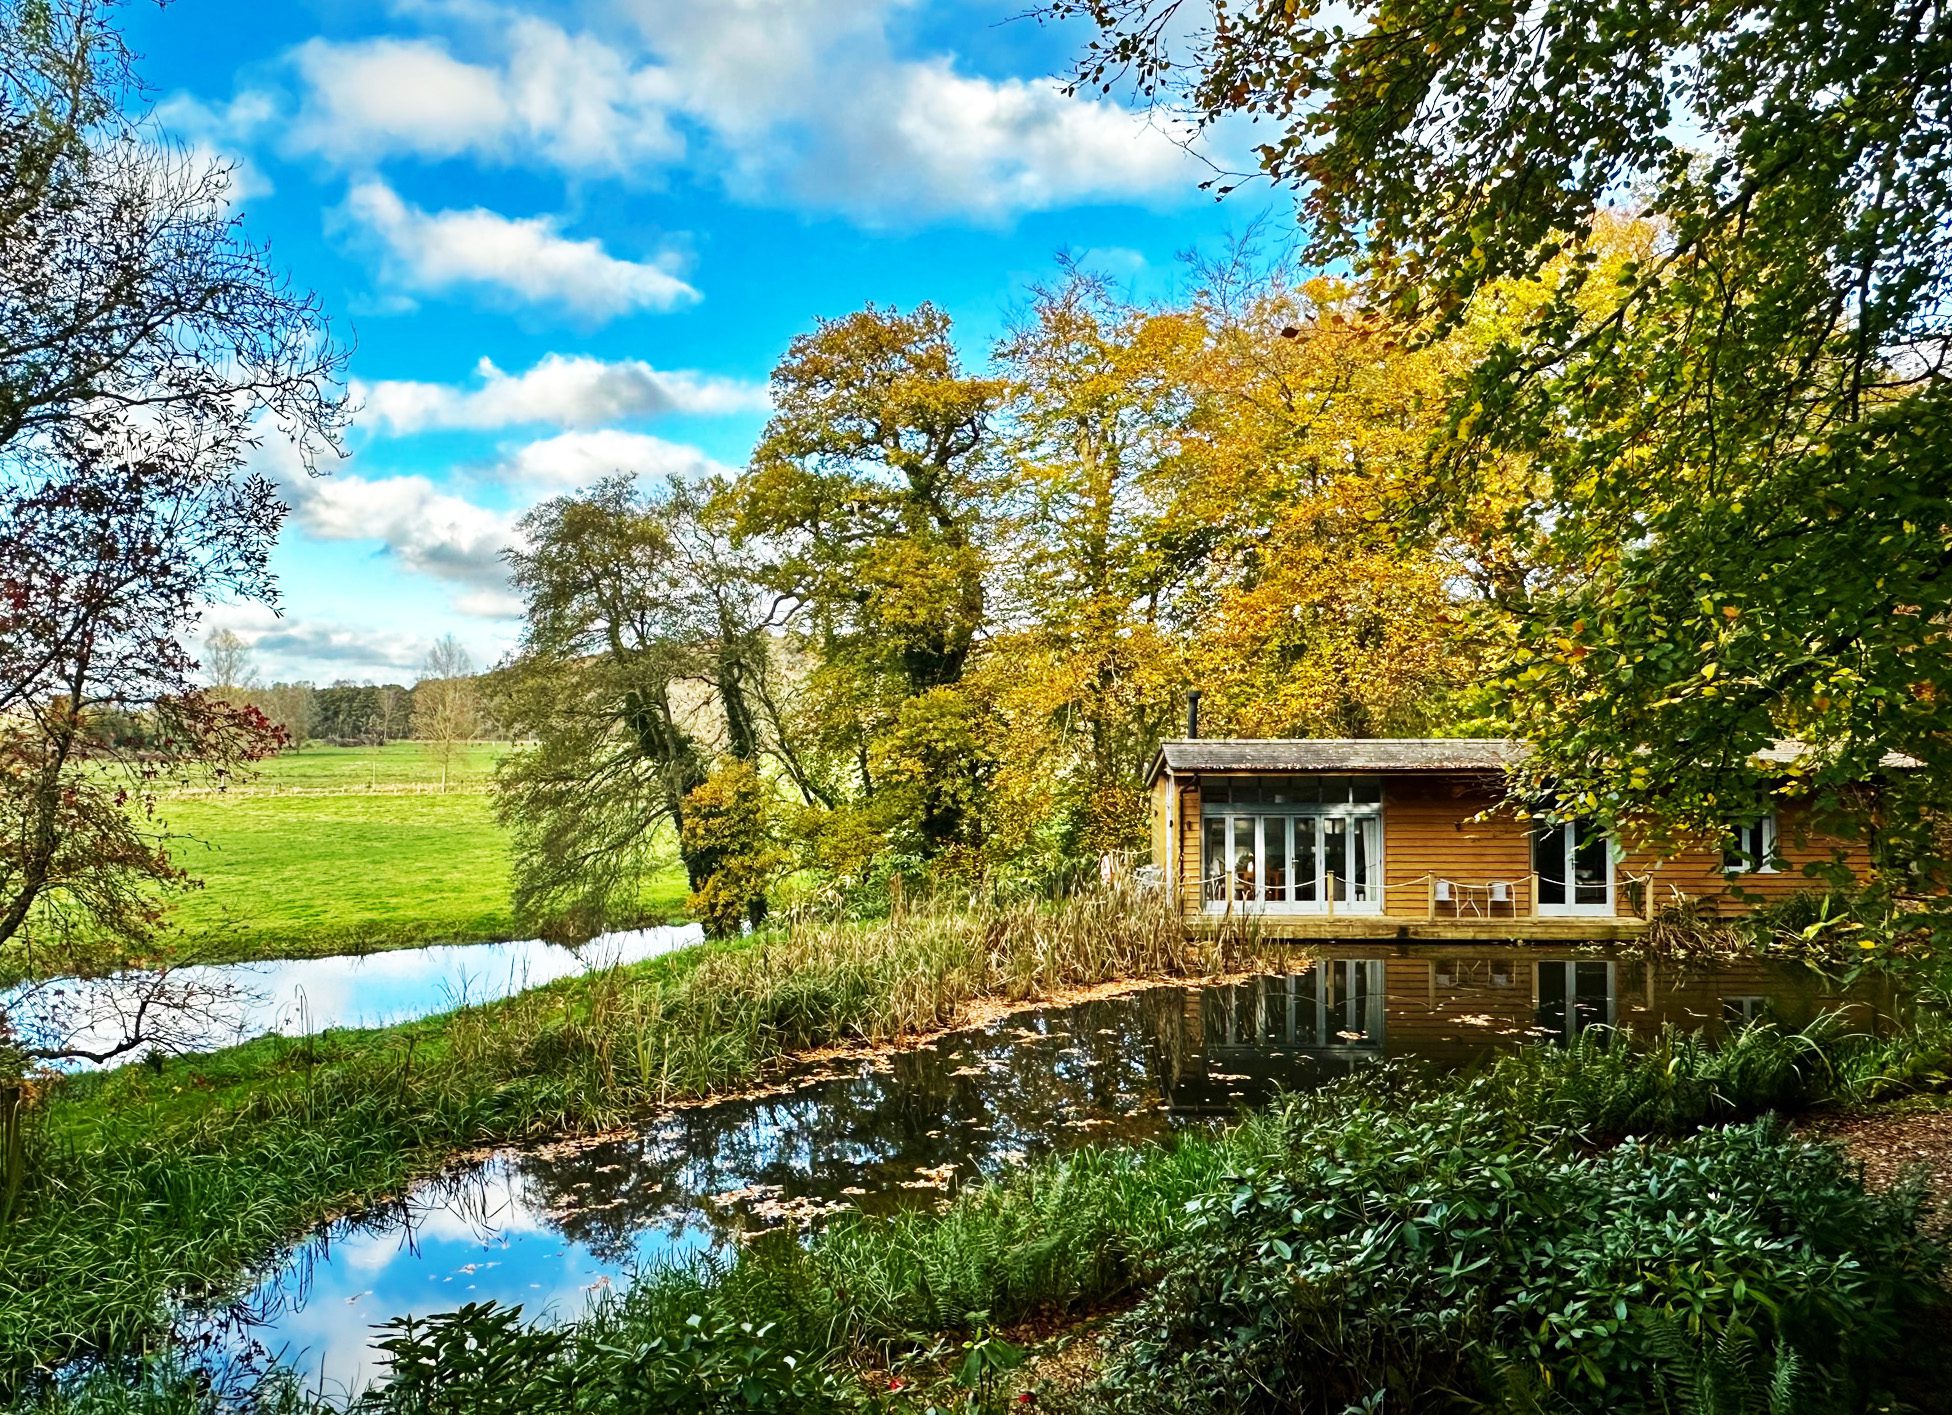 Short Stay Homes Riverside Lodge nestled in the new Forest on the Hampshire Avon